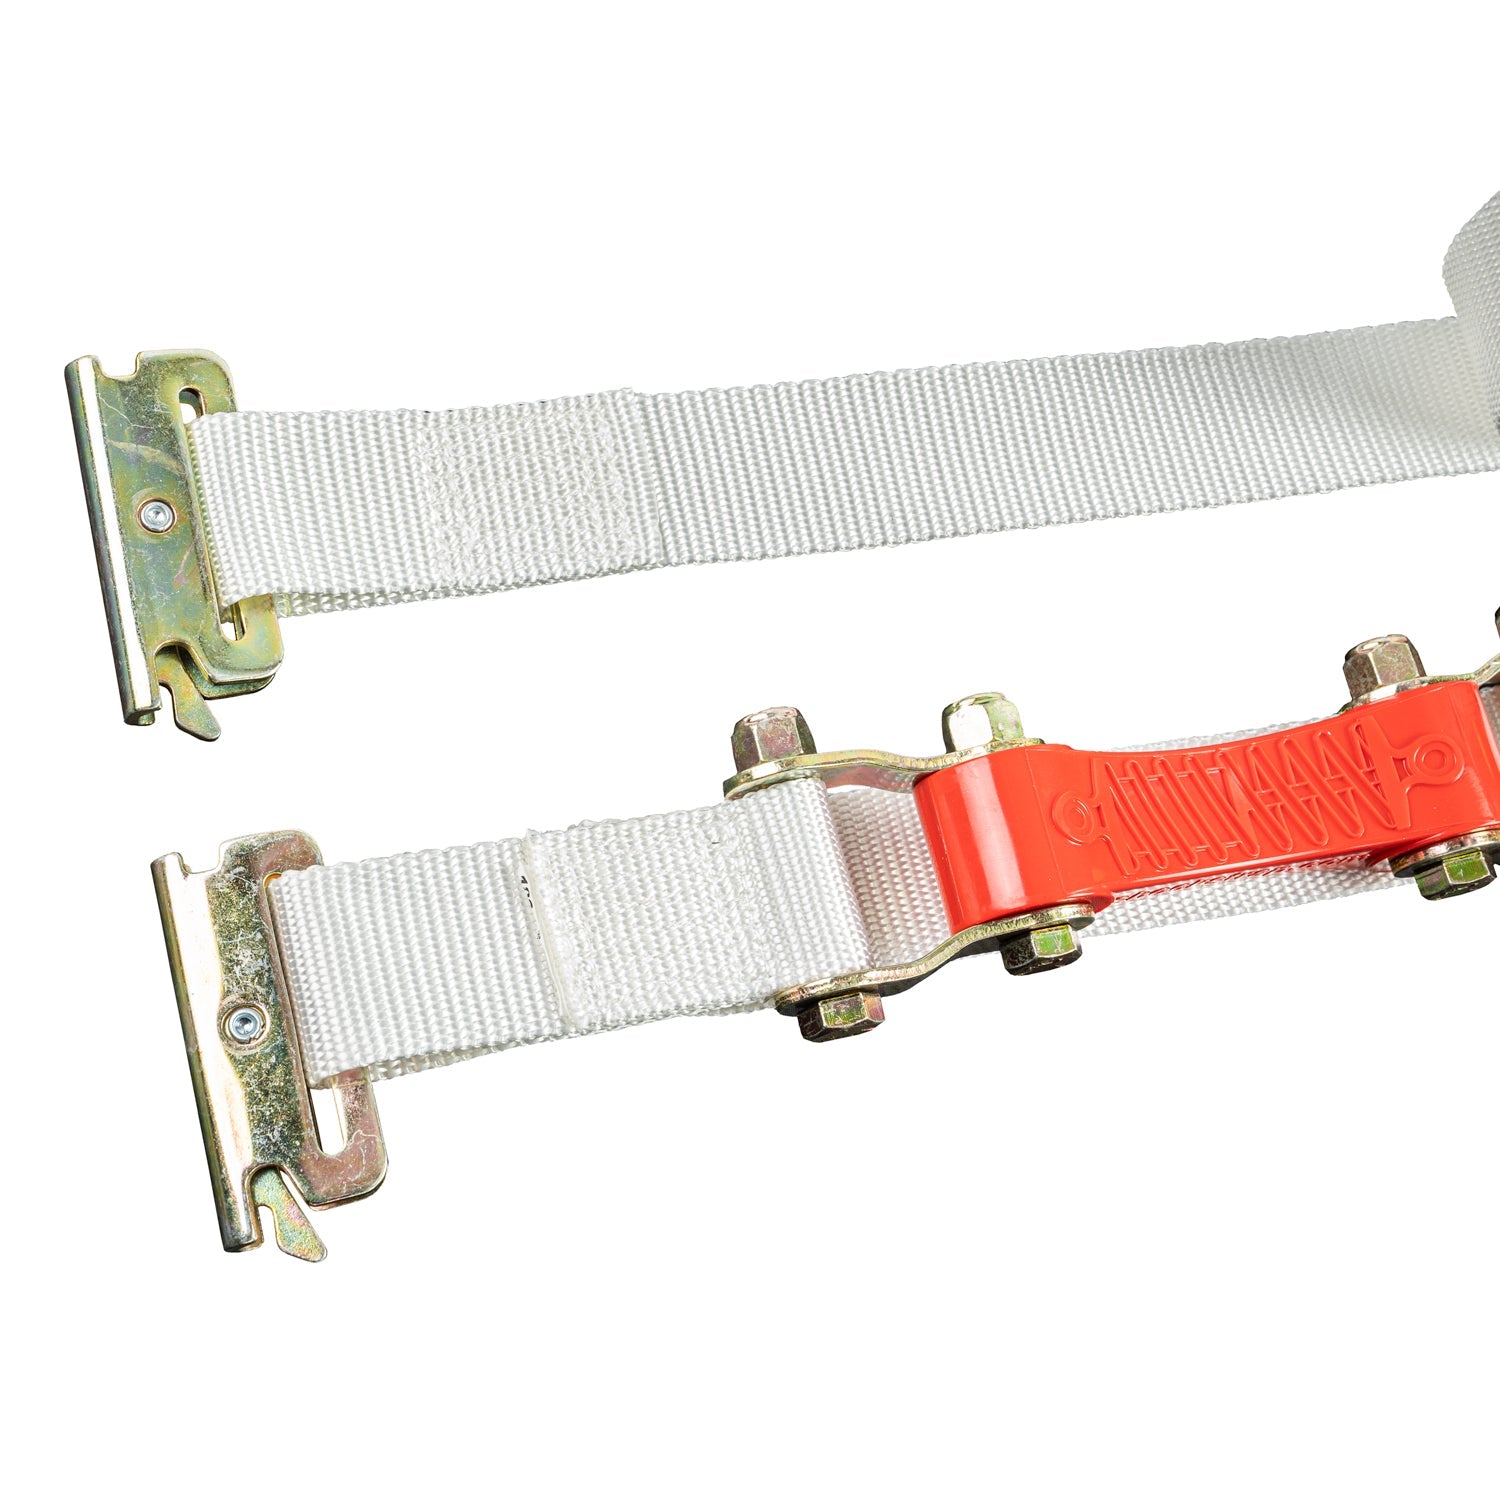 20ft x 1.5in ShockStrap Ratchet Strap with E Track Ends, 1k WLL - The Perfect Bungee & ShockStrap Tie Downs